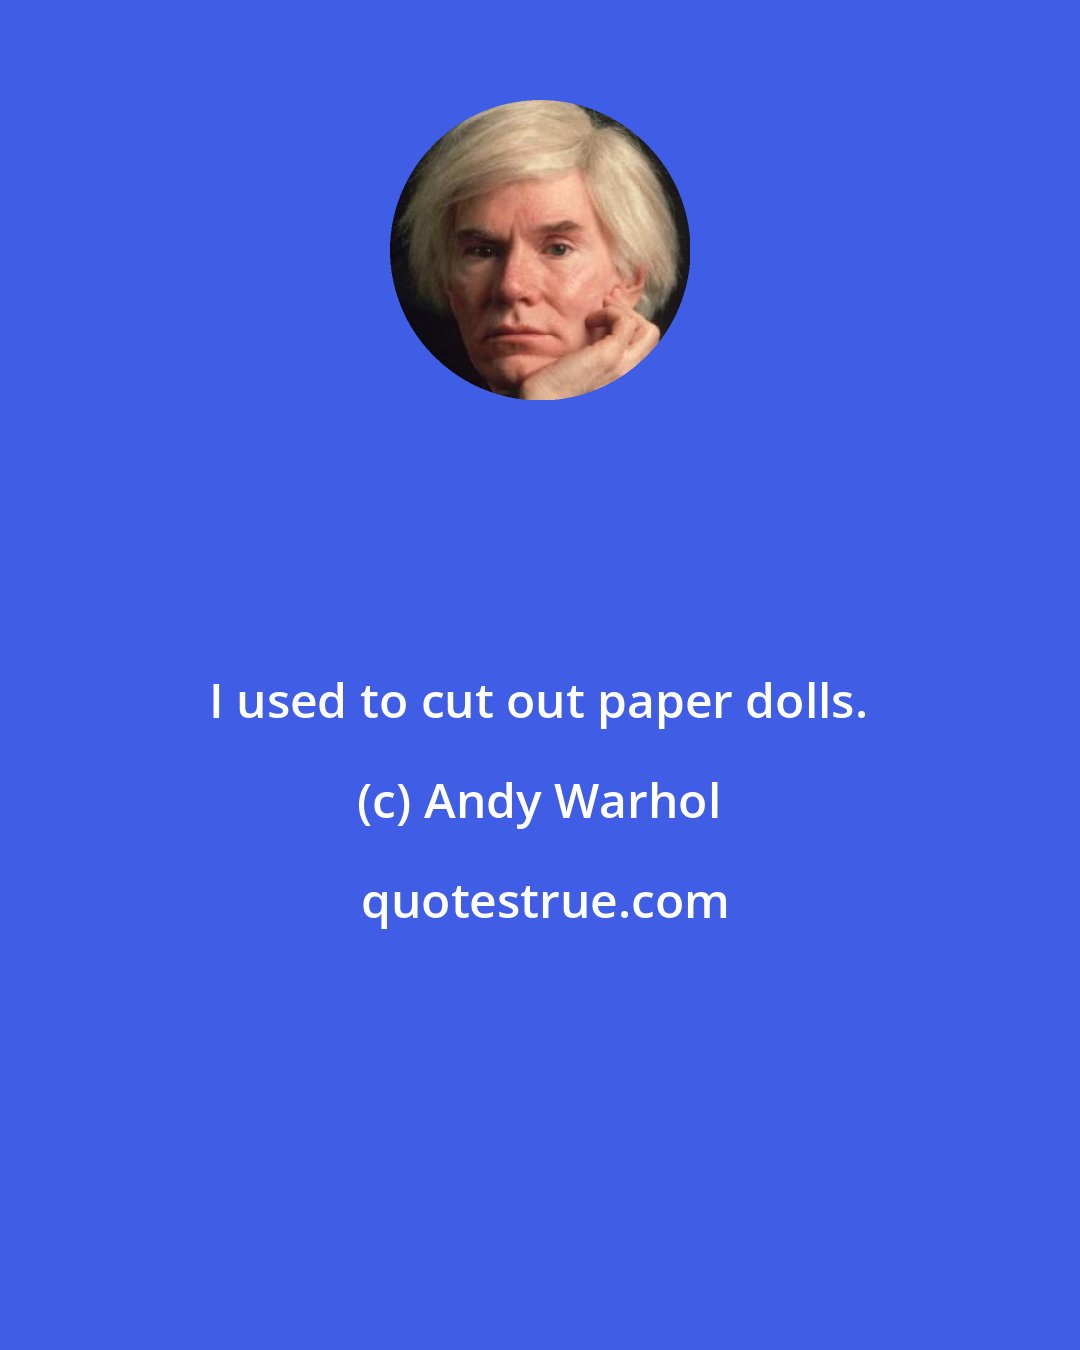 Andy Warhol: I used to cut out paper dolls.